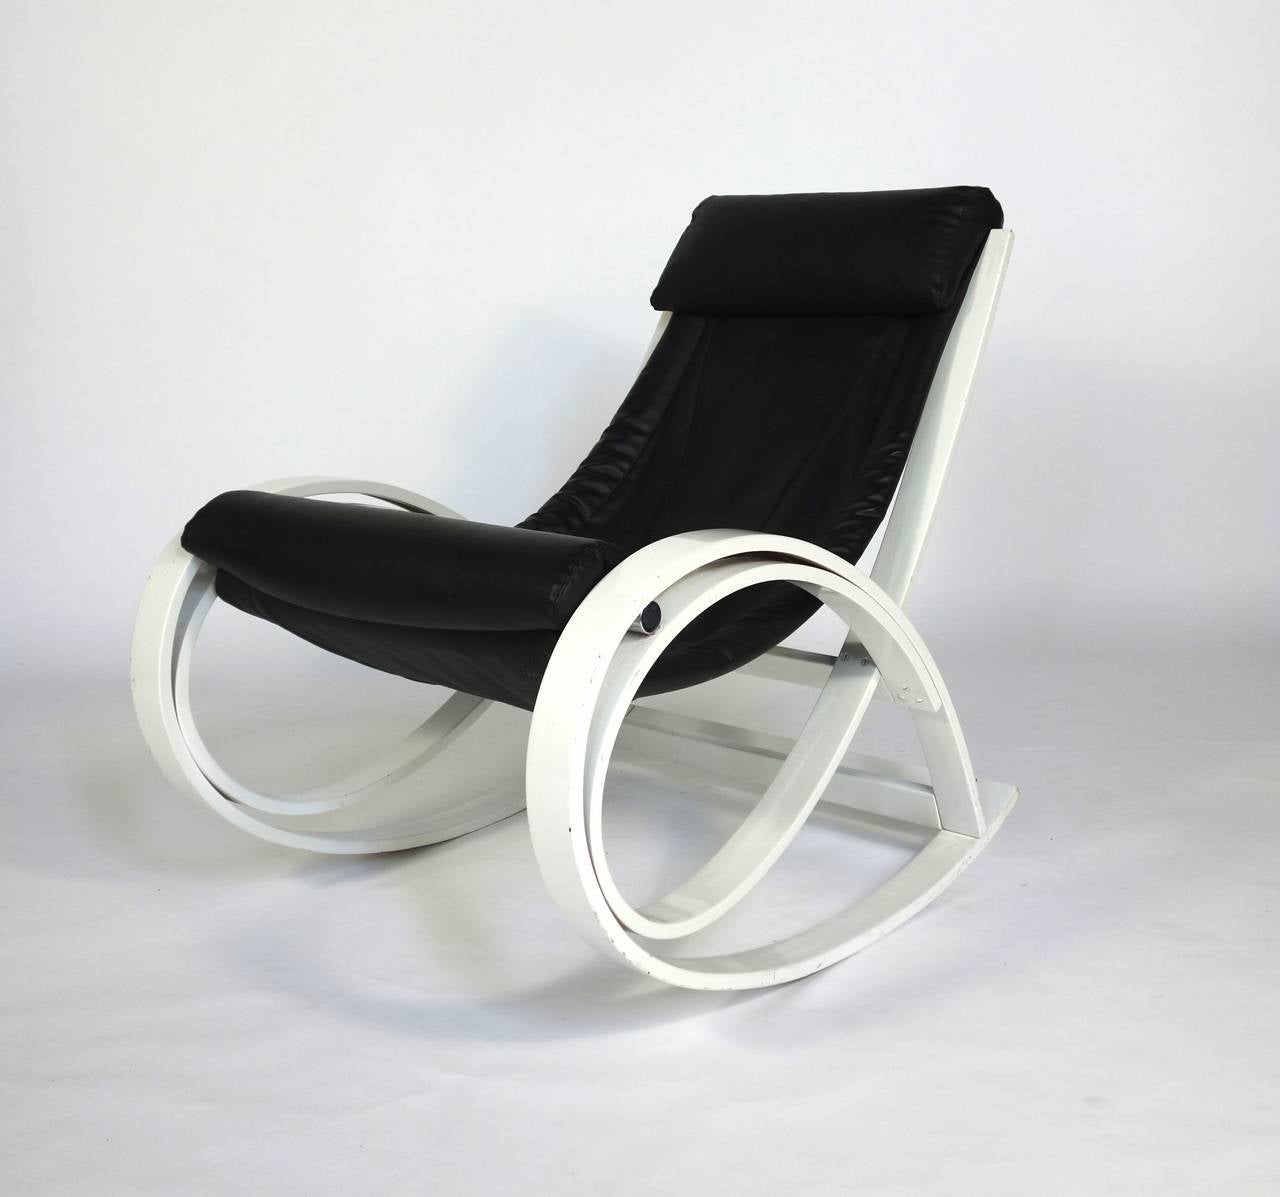 An iconic design by Gae Aulenti. The Sgarsul rocker was designed in the 1960s by Gae Aulenti and has been an iconic form every since. Retains its Poltronova/Stendig sticker.

Provenance: Lisa Belzberg Collection, Wright Auction House.